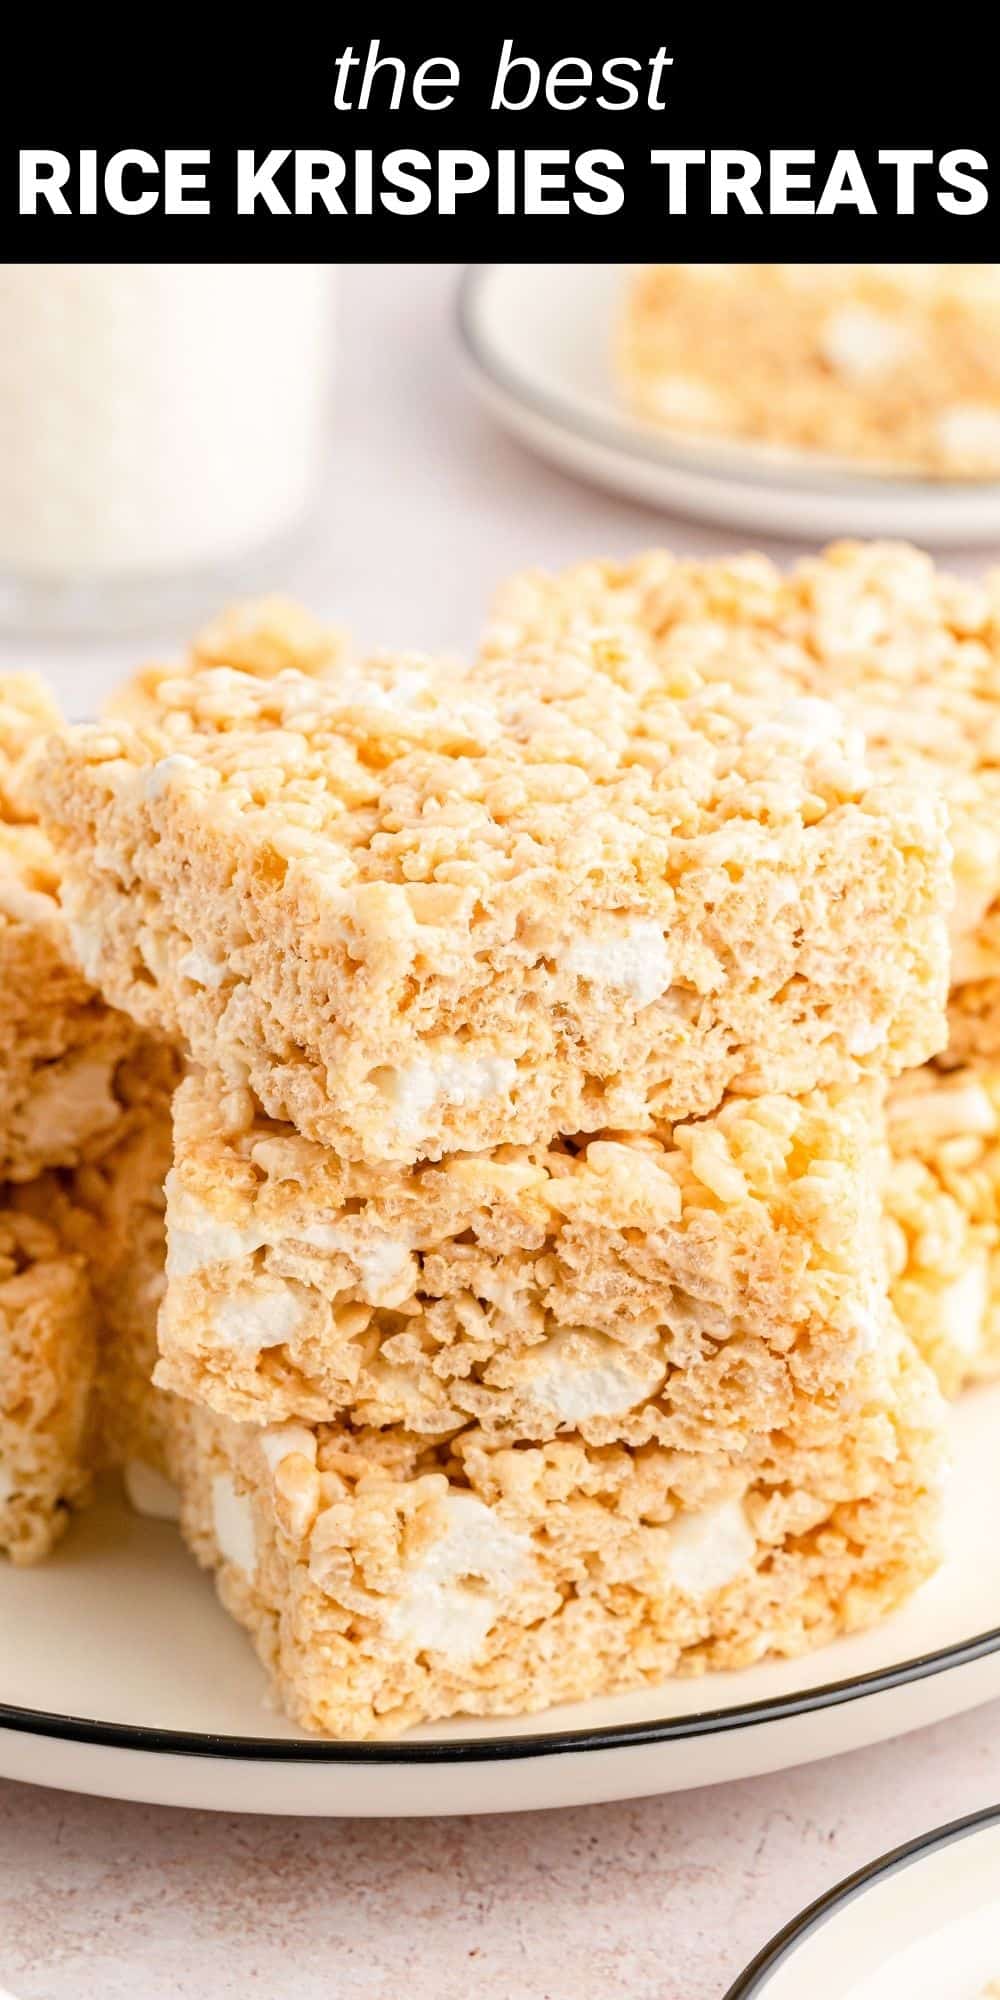 These Easy Rice Krispies Treats take the classic recipe to a whole new level. To make these cereal treats extra gooey and deliciously chewy, extra marshmallows and butter are used, along with some vanilla extract and a pinch of salt for added flavor.  